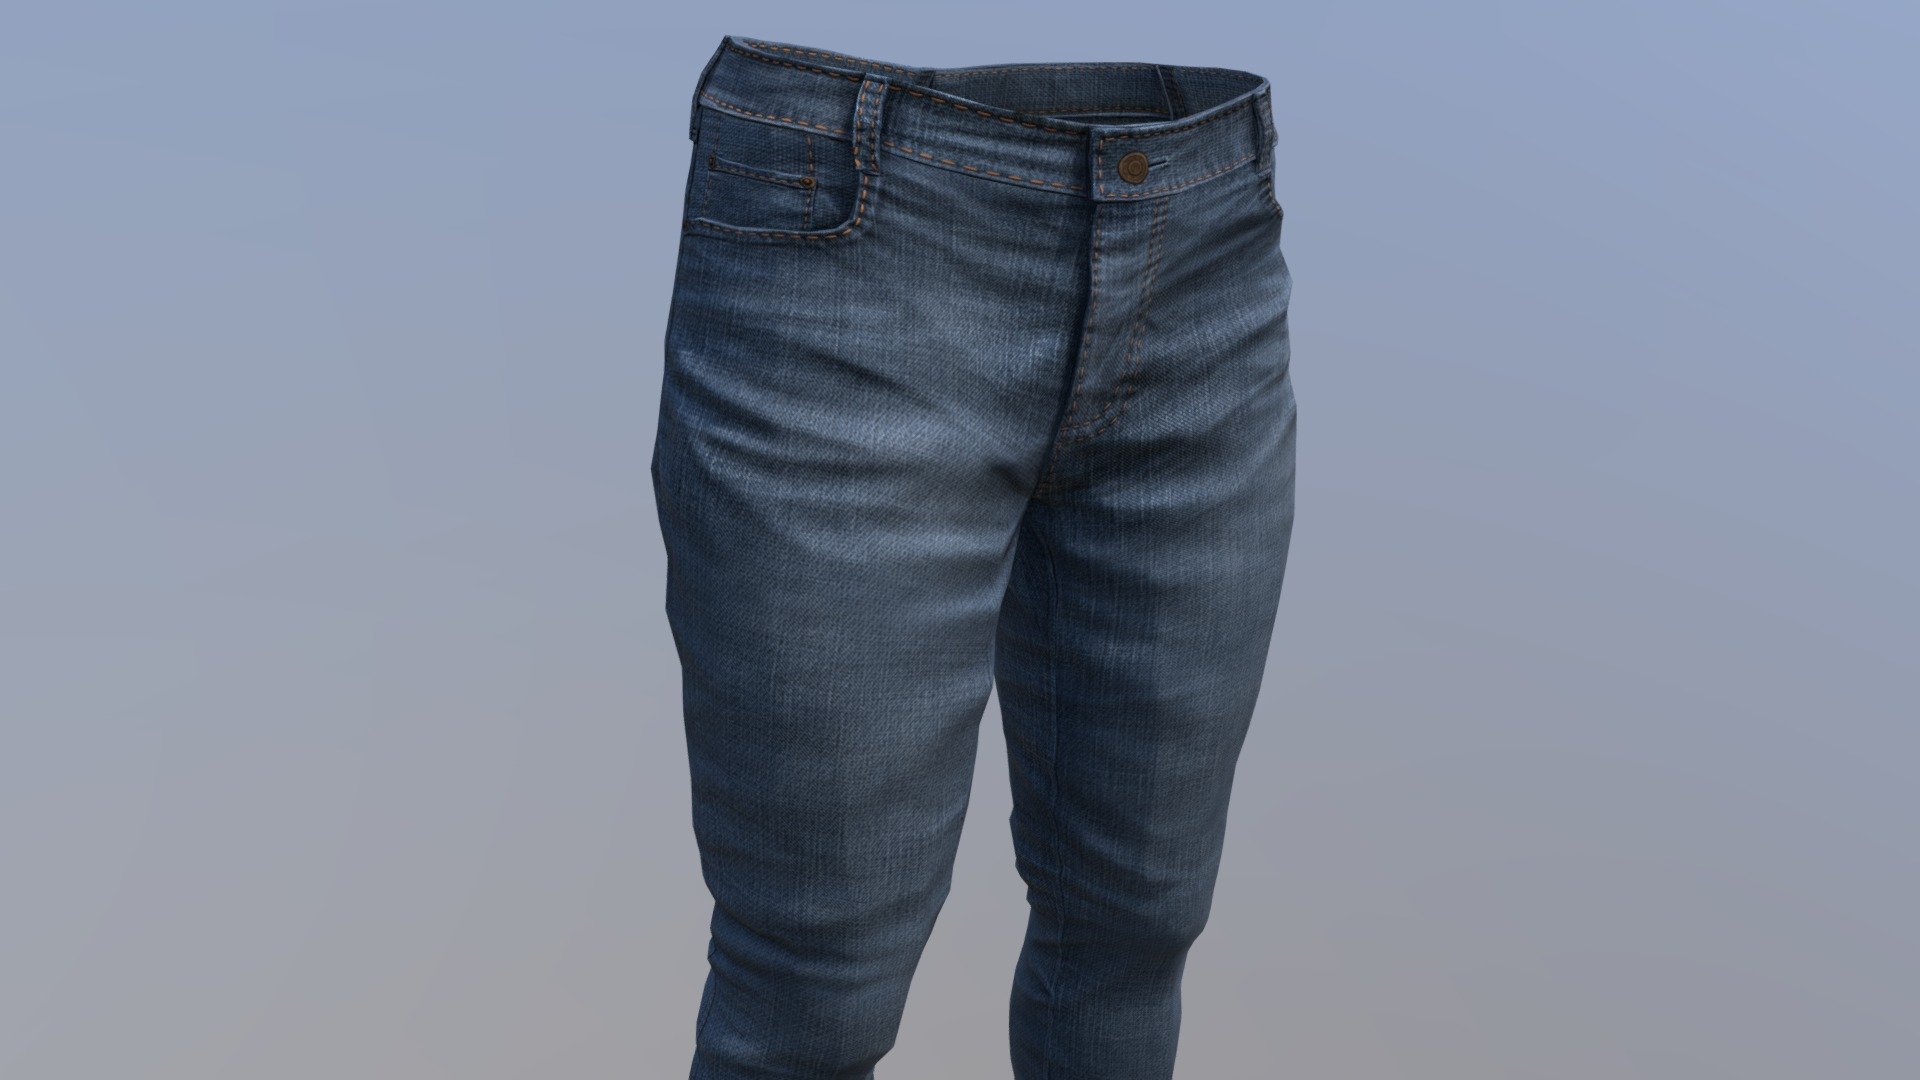 Female Pants And Shoes for Game - Buy Royalty Free 3D model by derek ...